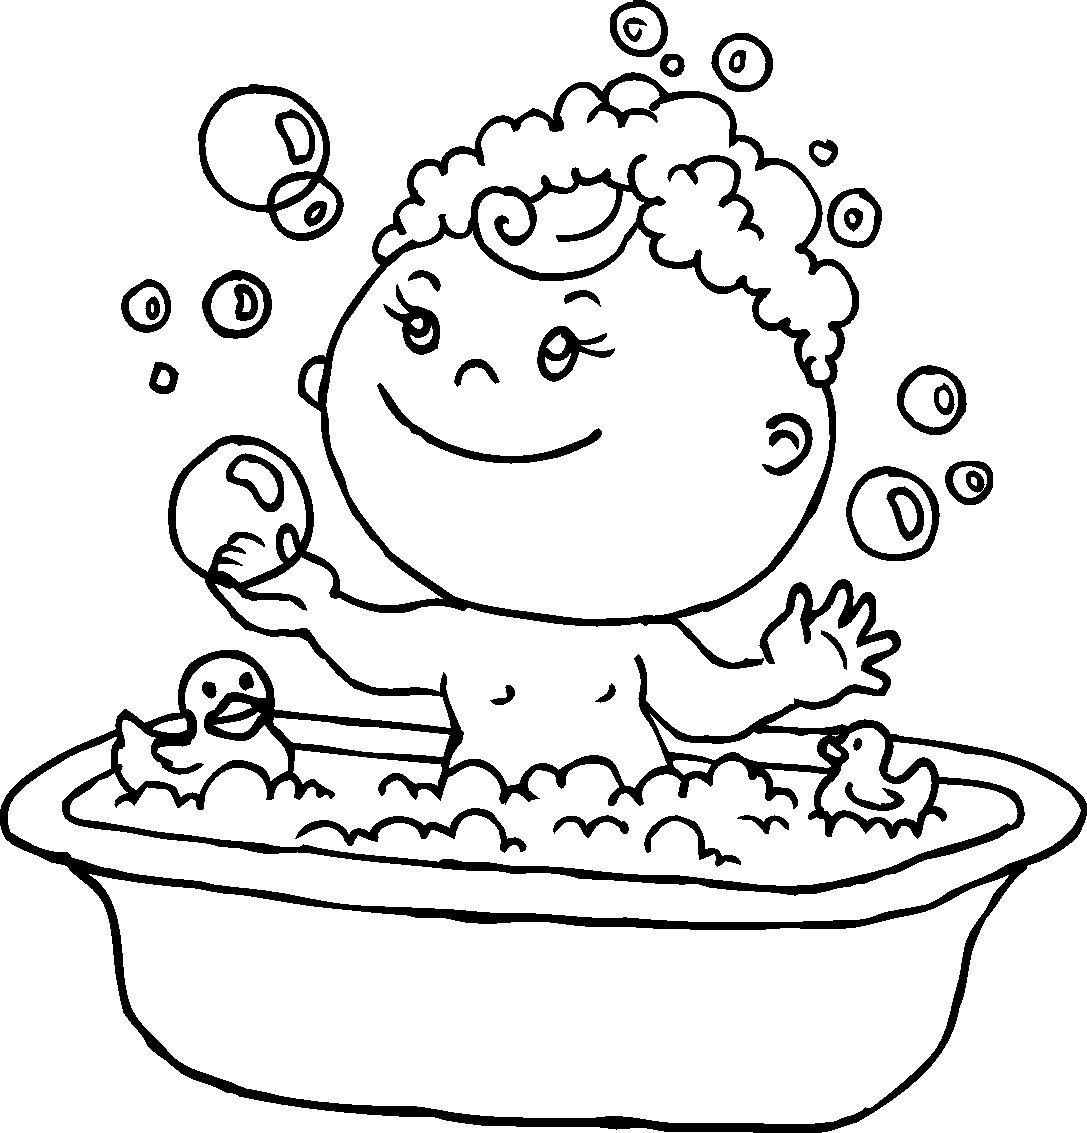 Coloring Sheets For Girls 8 10
 coloring pages for girls 10 and up Free